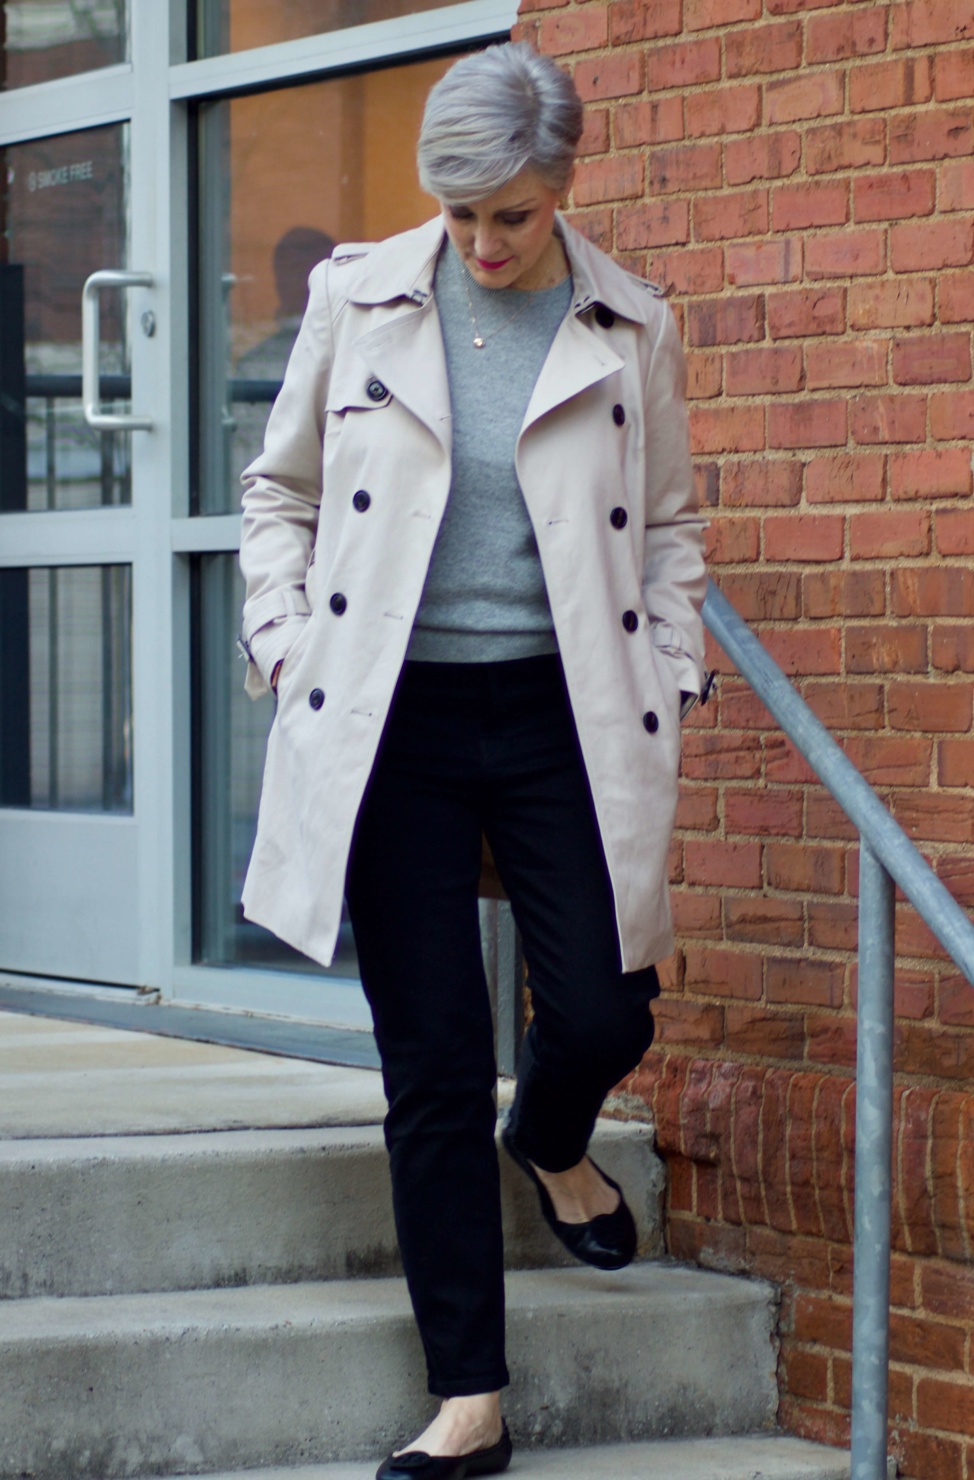 beth from Style at a Certain Age wears an Everlane grey cashmere crewneck, high rise black cigarette jean, Tory Burch black ballet flats and a double-breasted trench coat